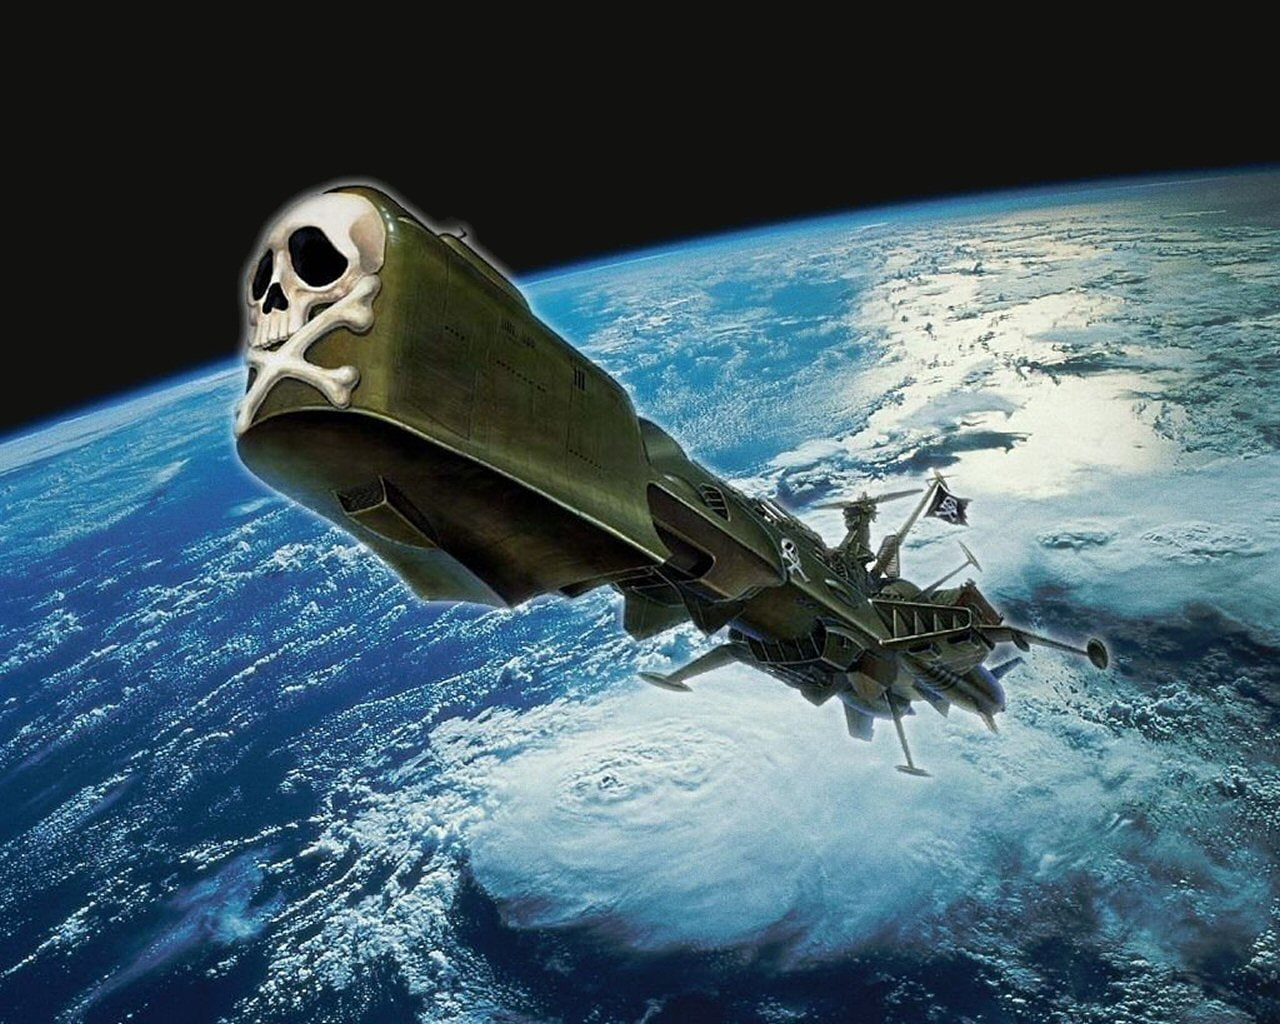 Anime, Captain Harlock, nature, space, water, air vehicle, planet earth